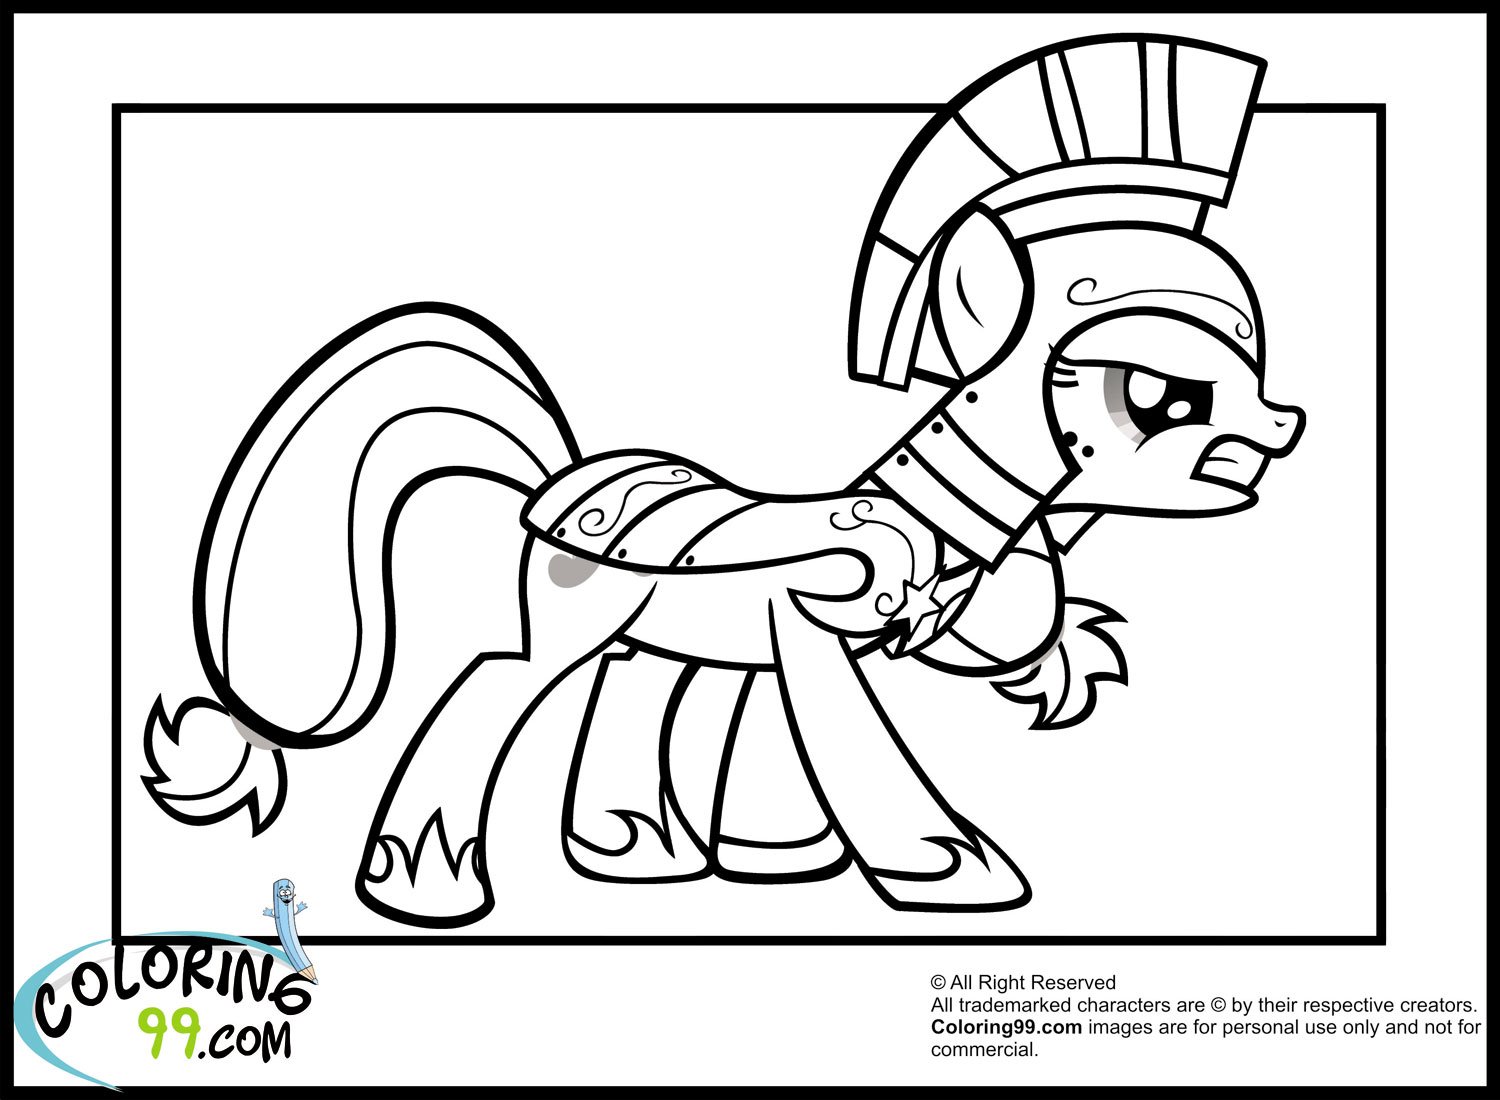 Download My Little Pony Applejack Coloring Pages | Team colors